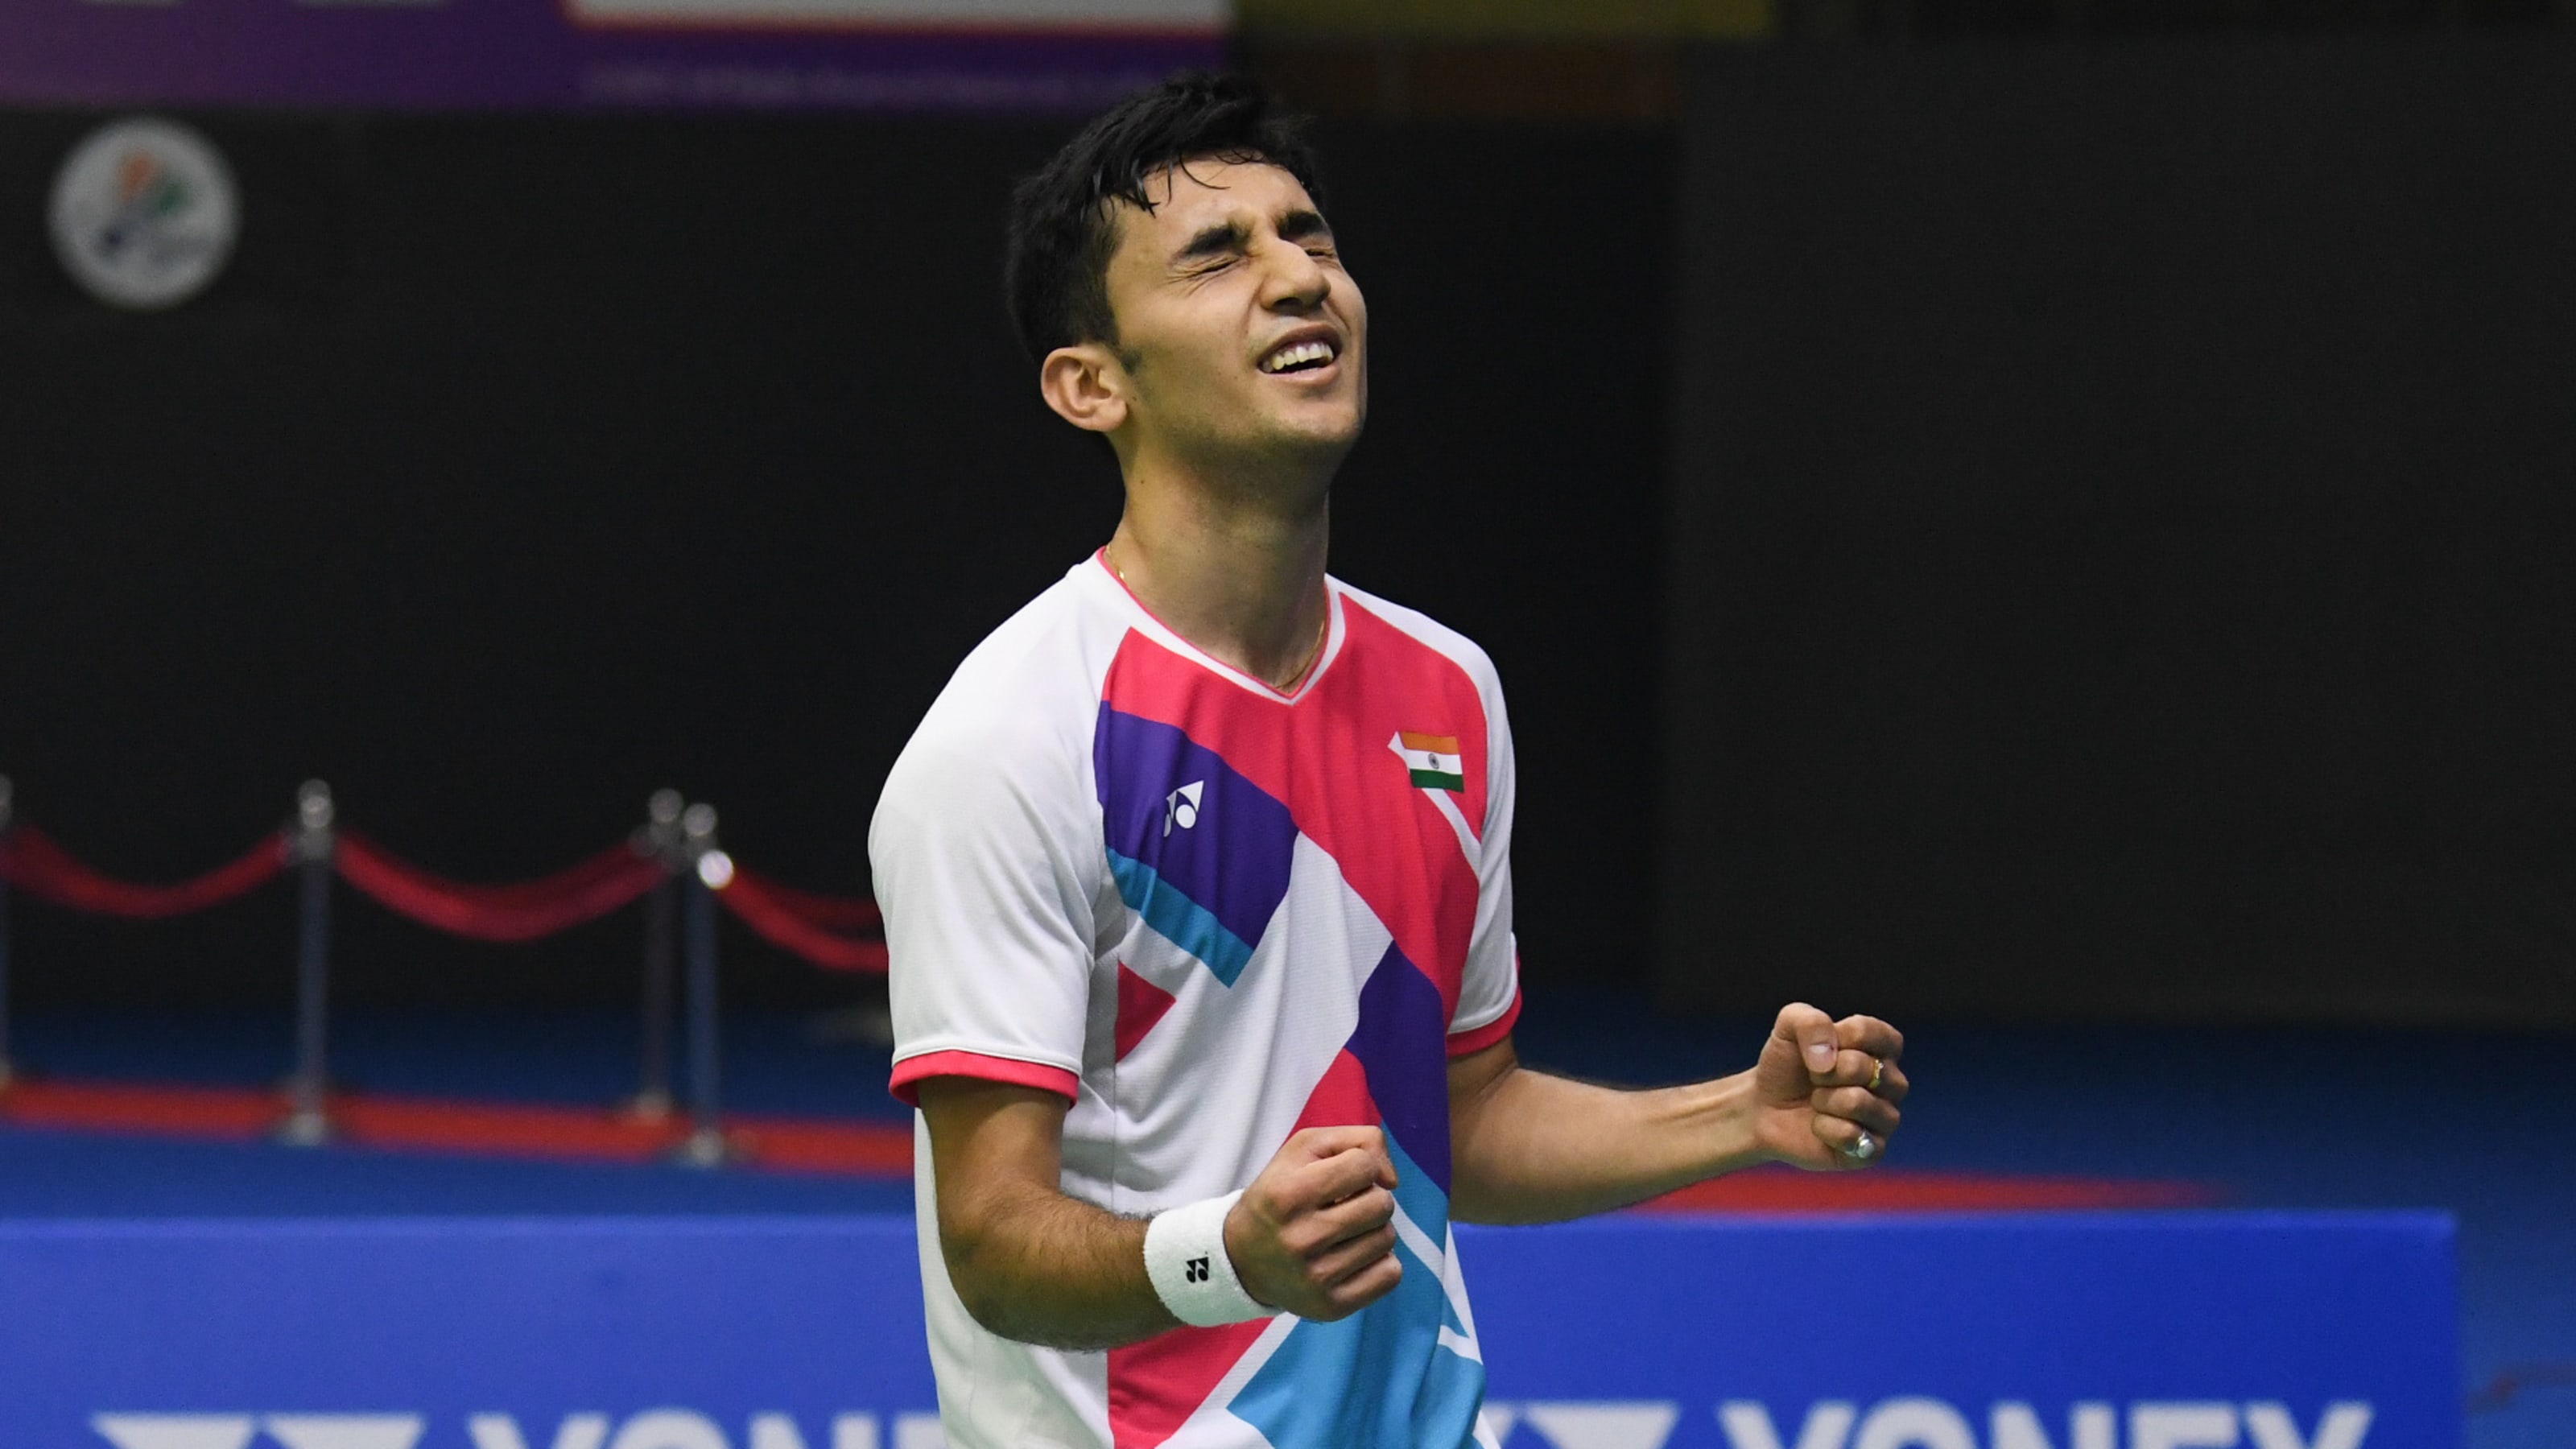 CWG 2022 Badminton Live: India vs Singapore in mixed team event semifinal at 10 PM, India to field strong team, follow live updates